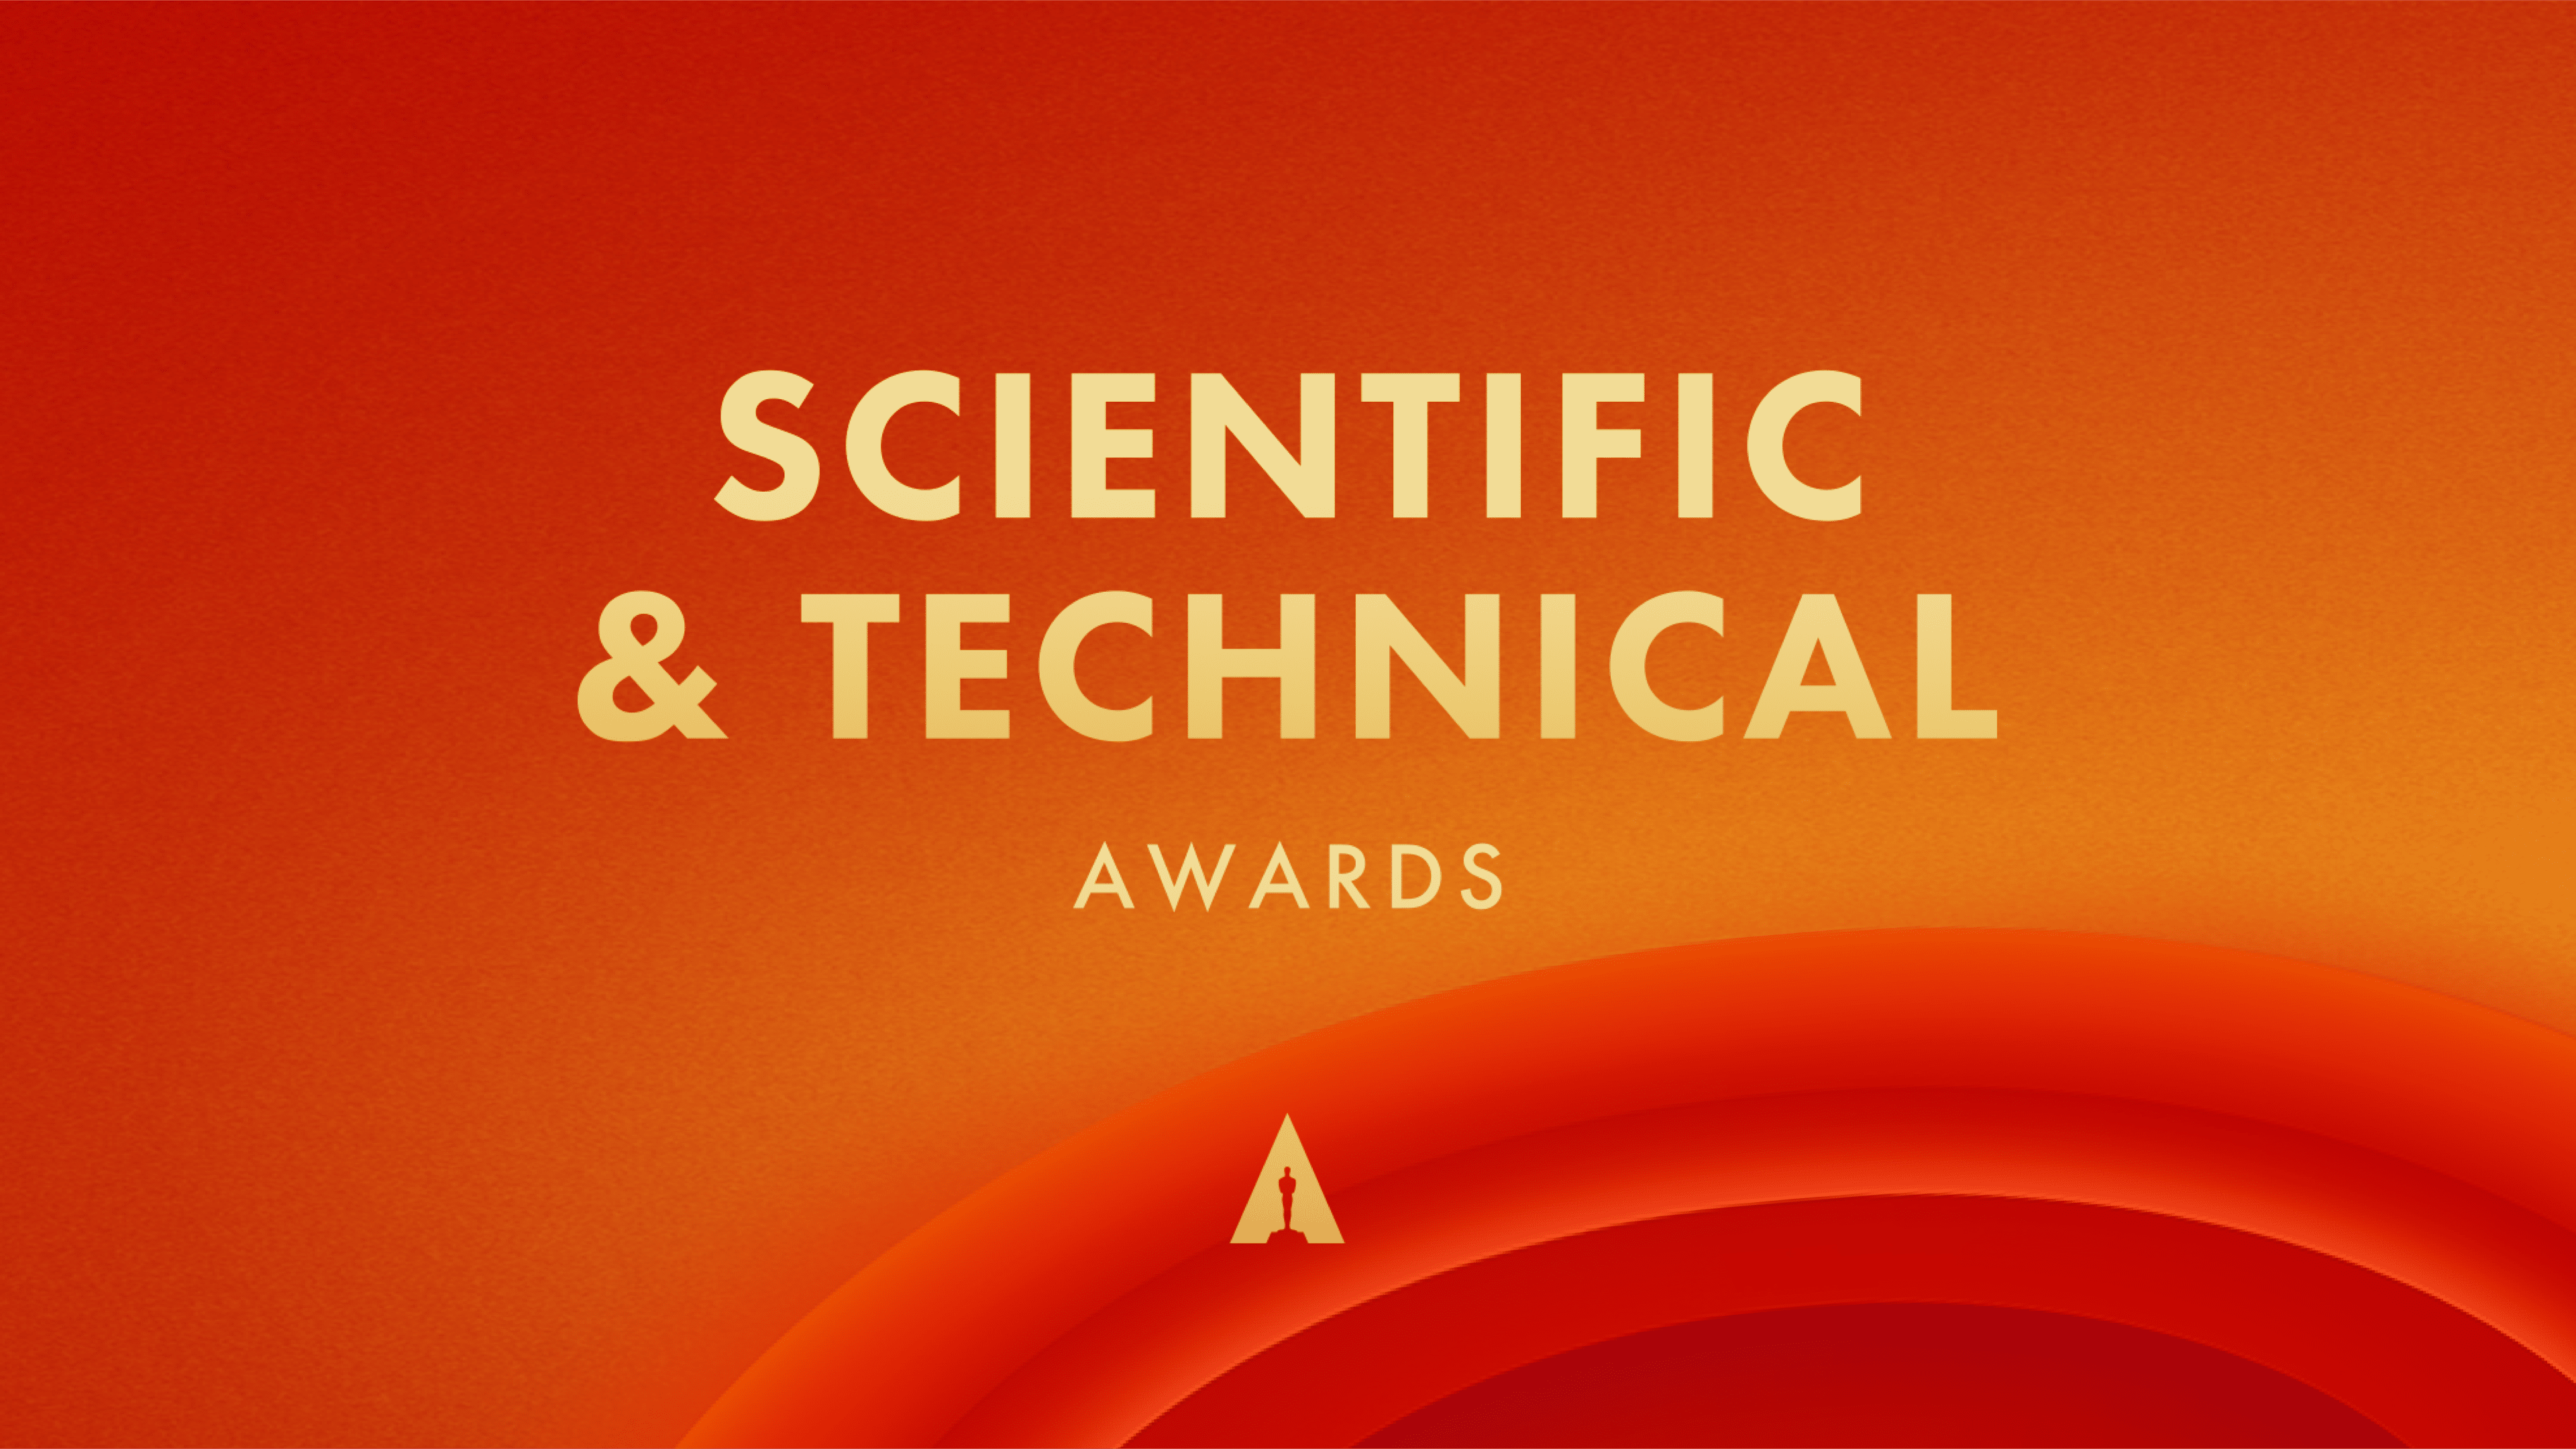 16 SCIENTIFIC AND TECHNICAL ACHIEVEMENTS TO BE HONORED WITH ACADEMY AWARDS®